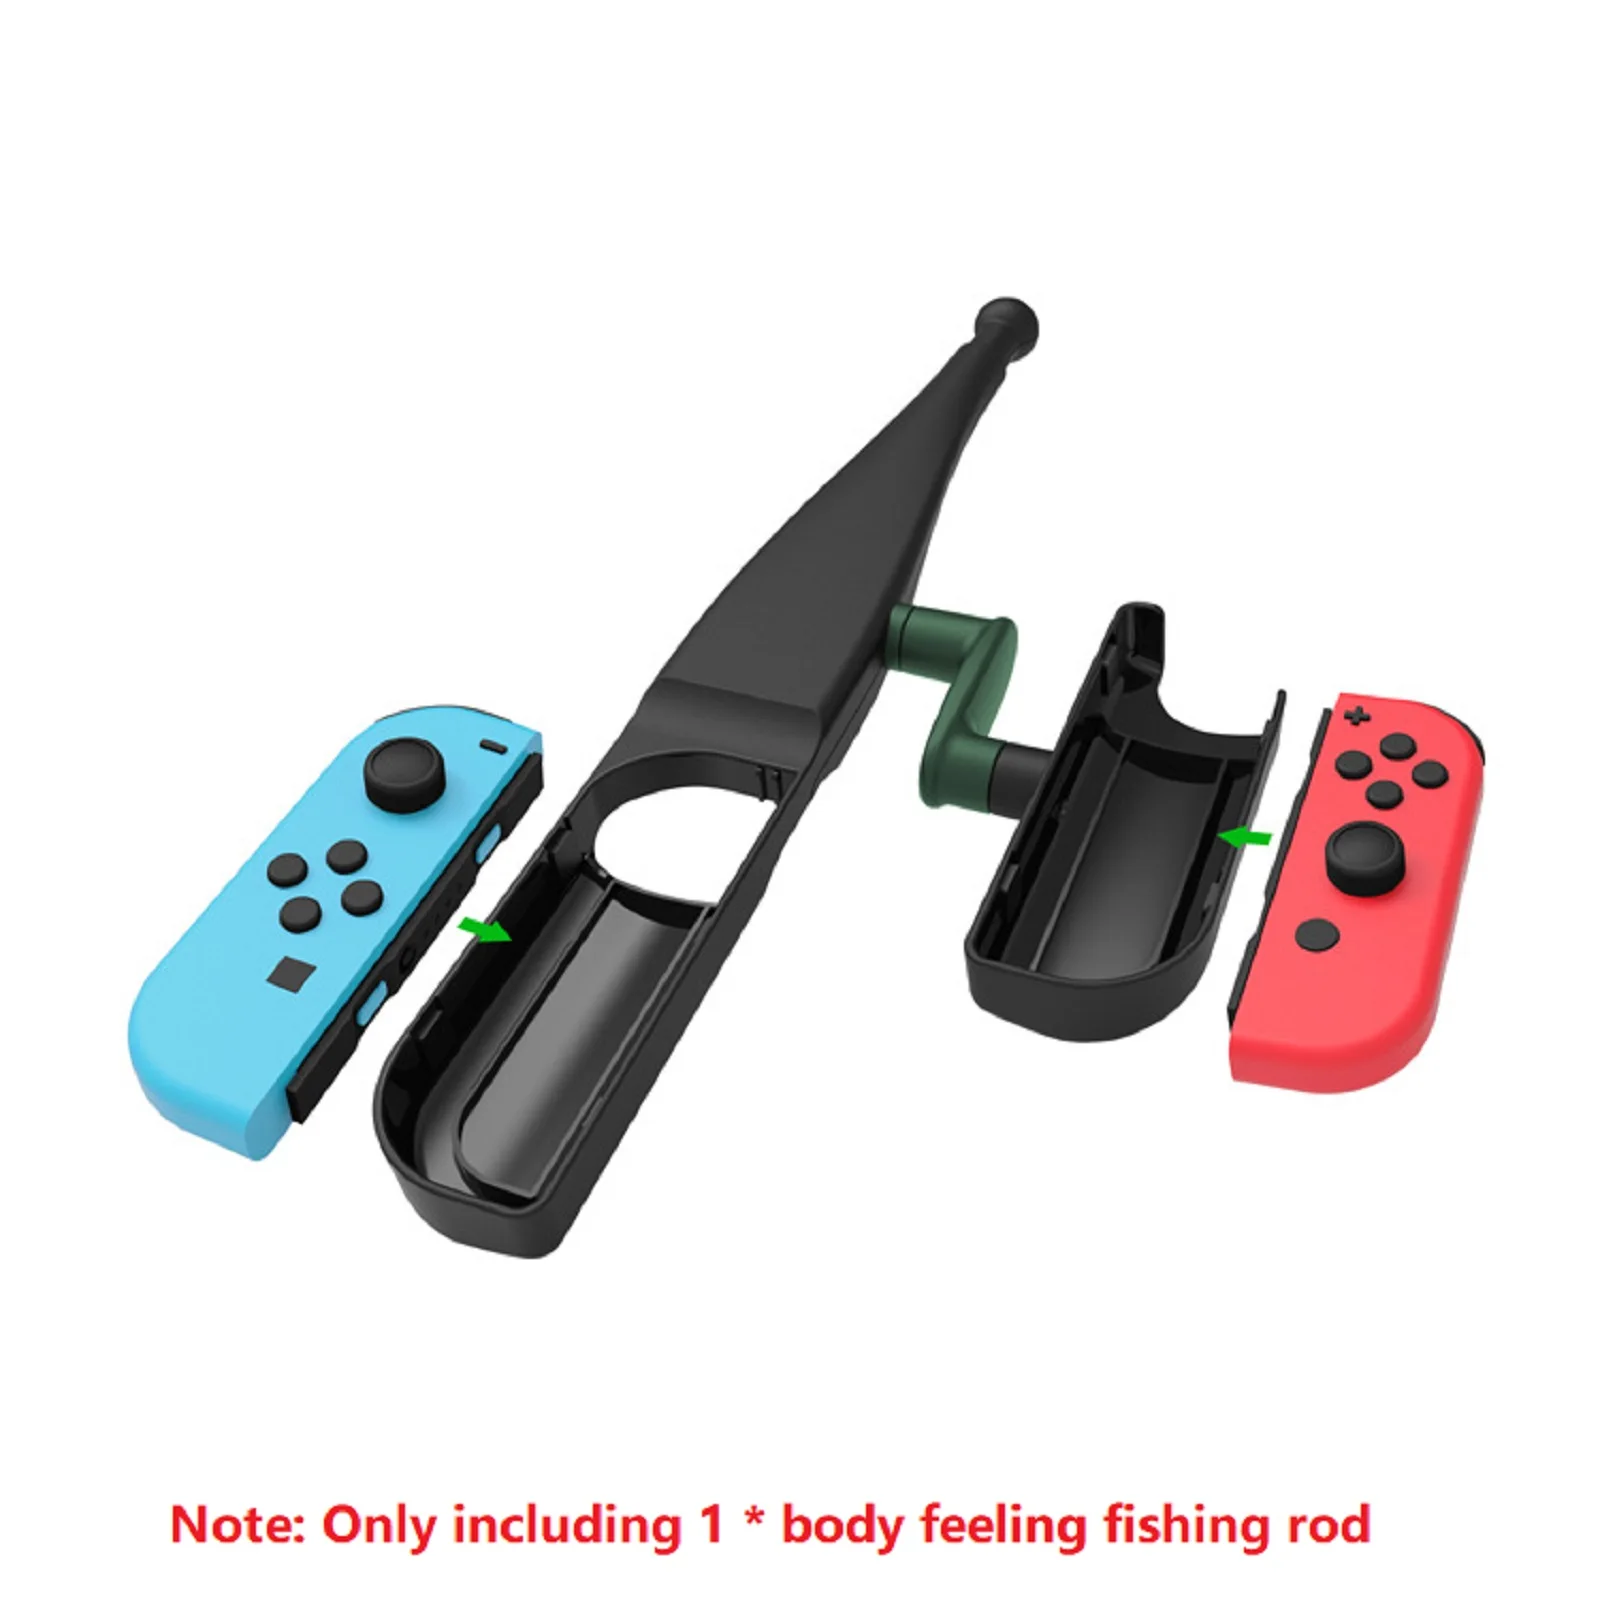 https://ae01.alicdn.com/kf/Se1c6245e24b3440ea562990a990ea96f0/Fishing-Rod-For-Nintendo-Switch-Joy-Con-Game-Console-Accessories-Fishing-Game-Kit-Replacement-For-Switch.jpg